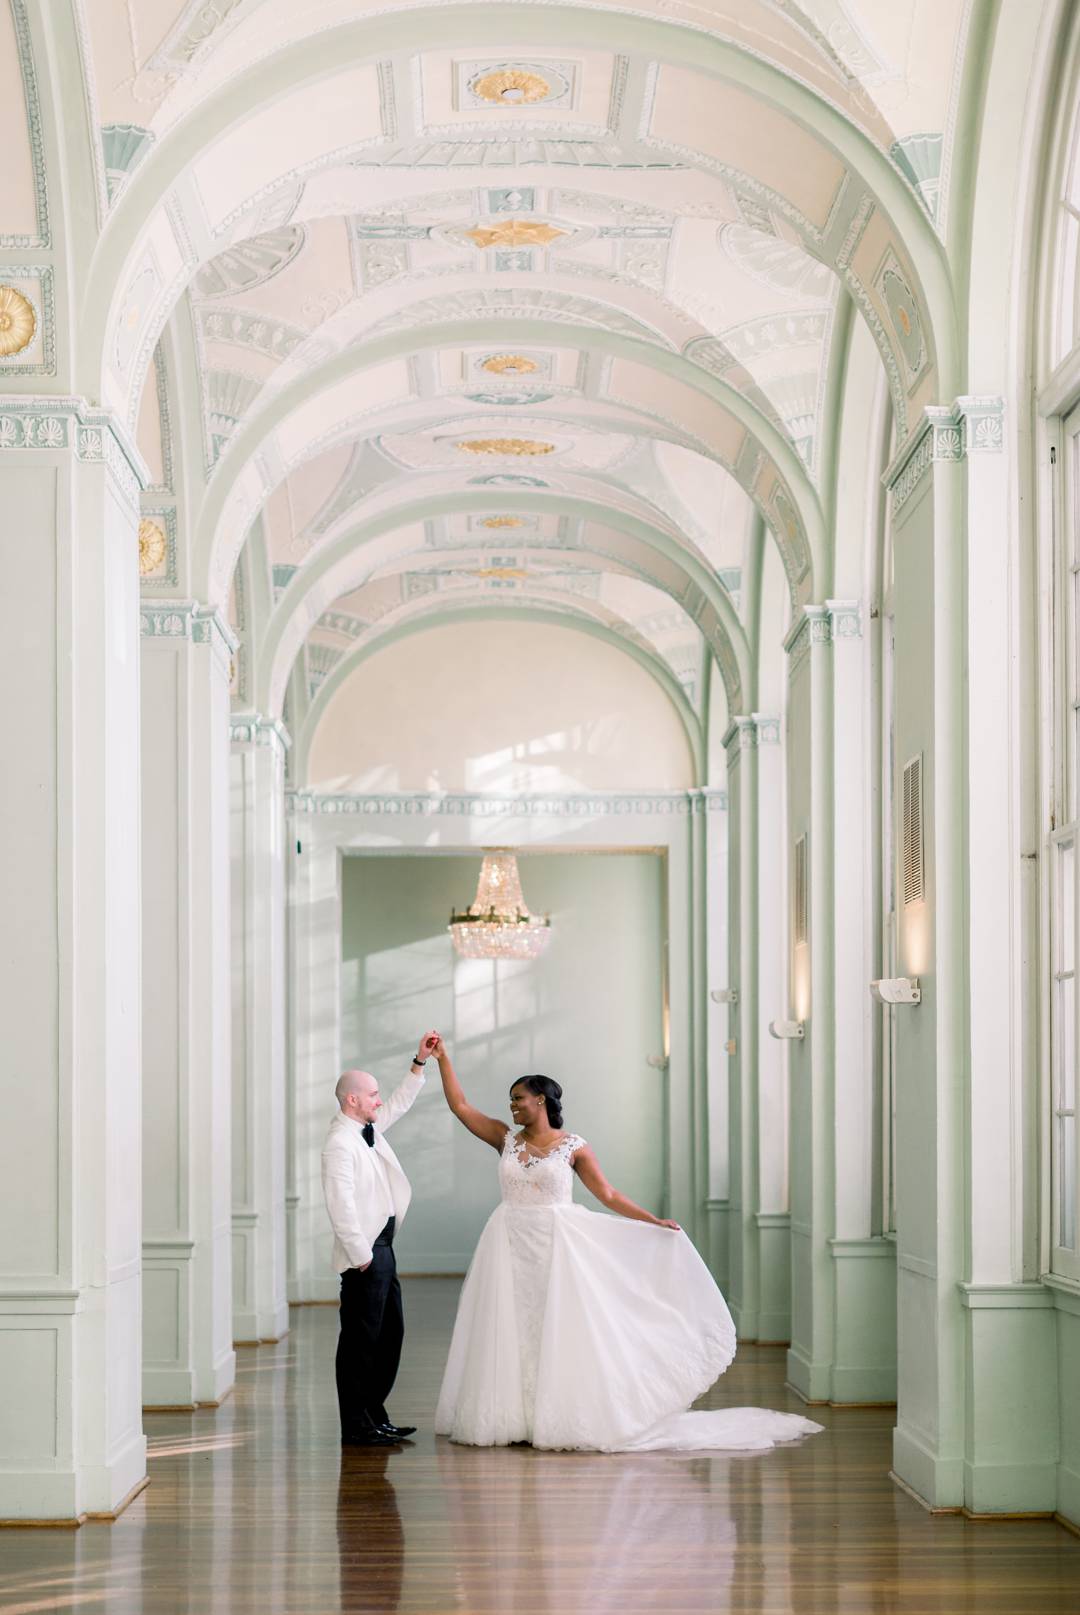 Bride and Groom Portraits in the Georgian Ballroom. A Winter Wonderland Wedding at the Biltmore Ballrooms in Atlanta, GA by Leigh Wolfe Photography